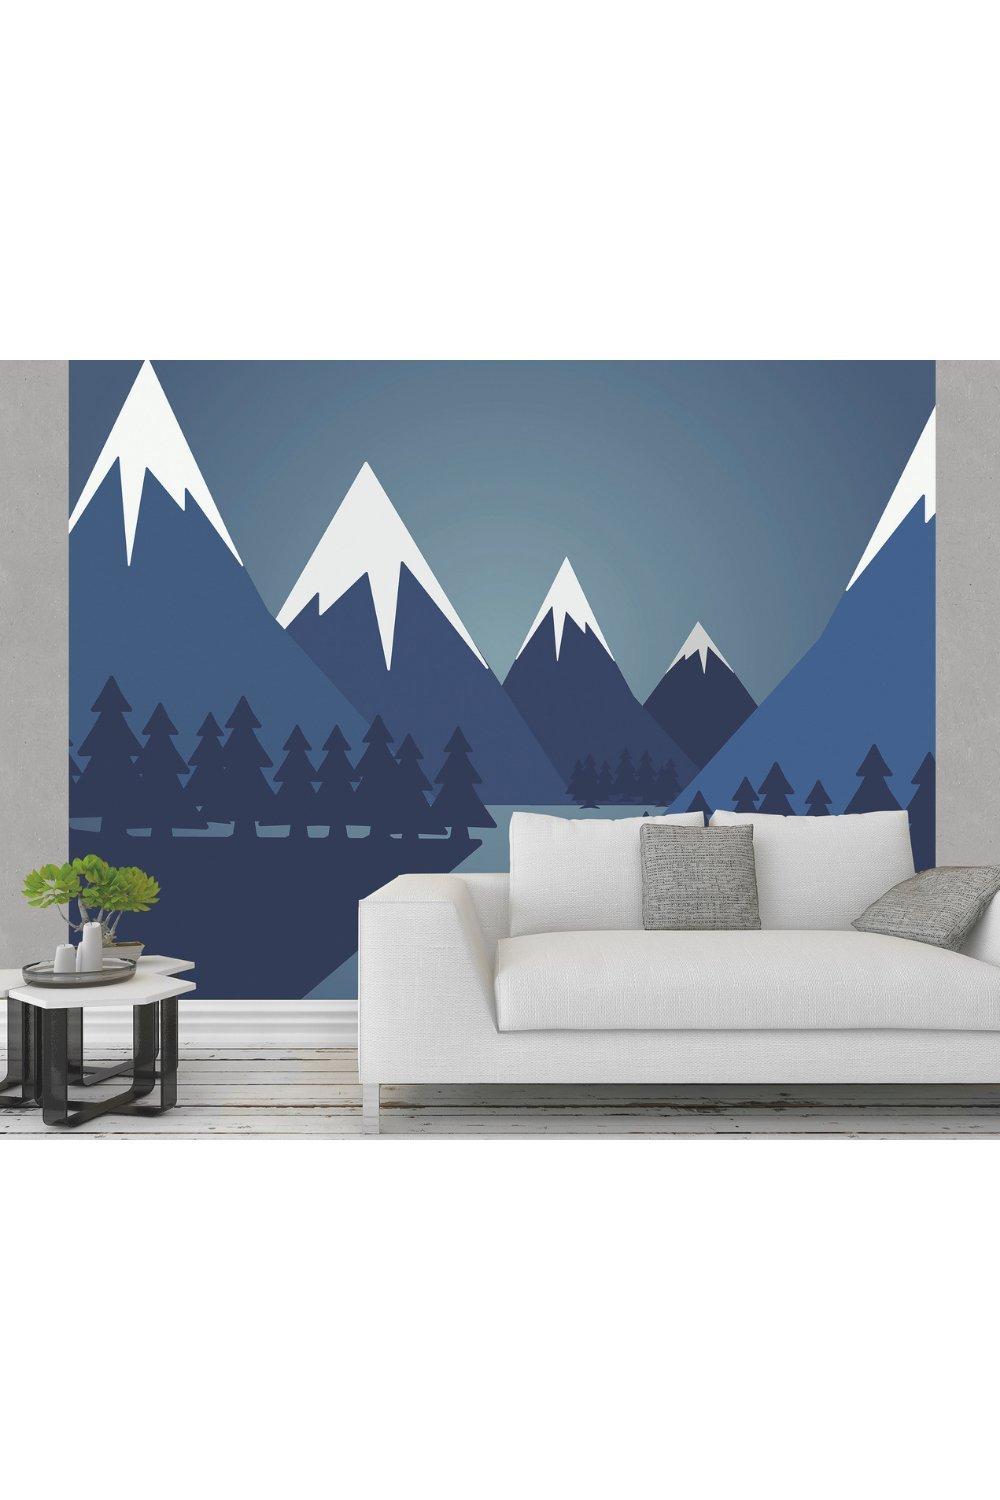 Snowy Mountains Wall Mural